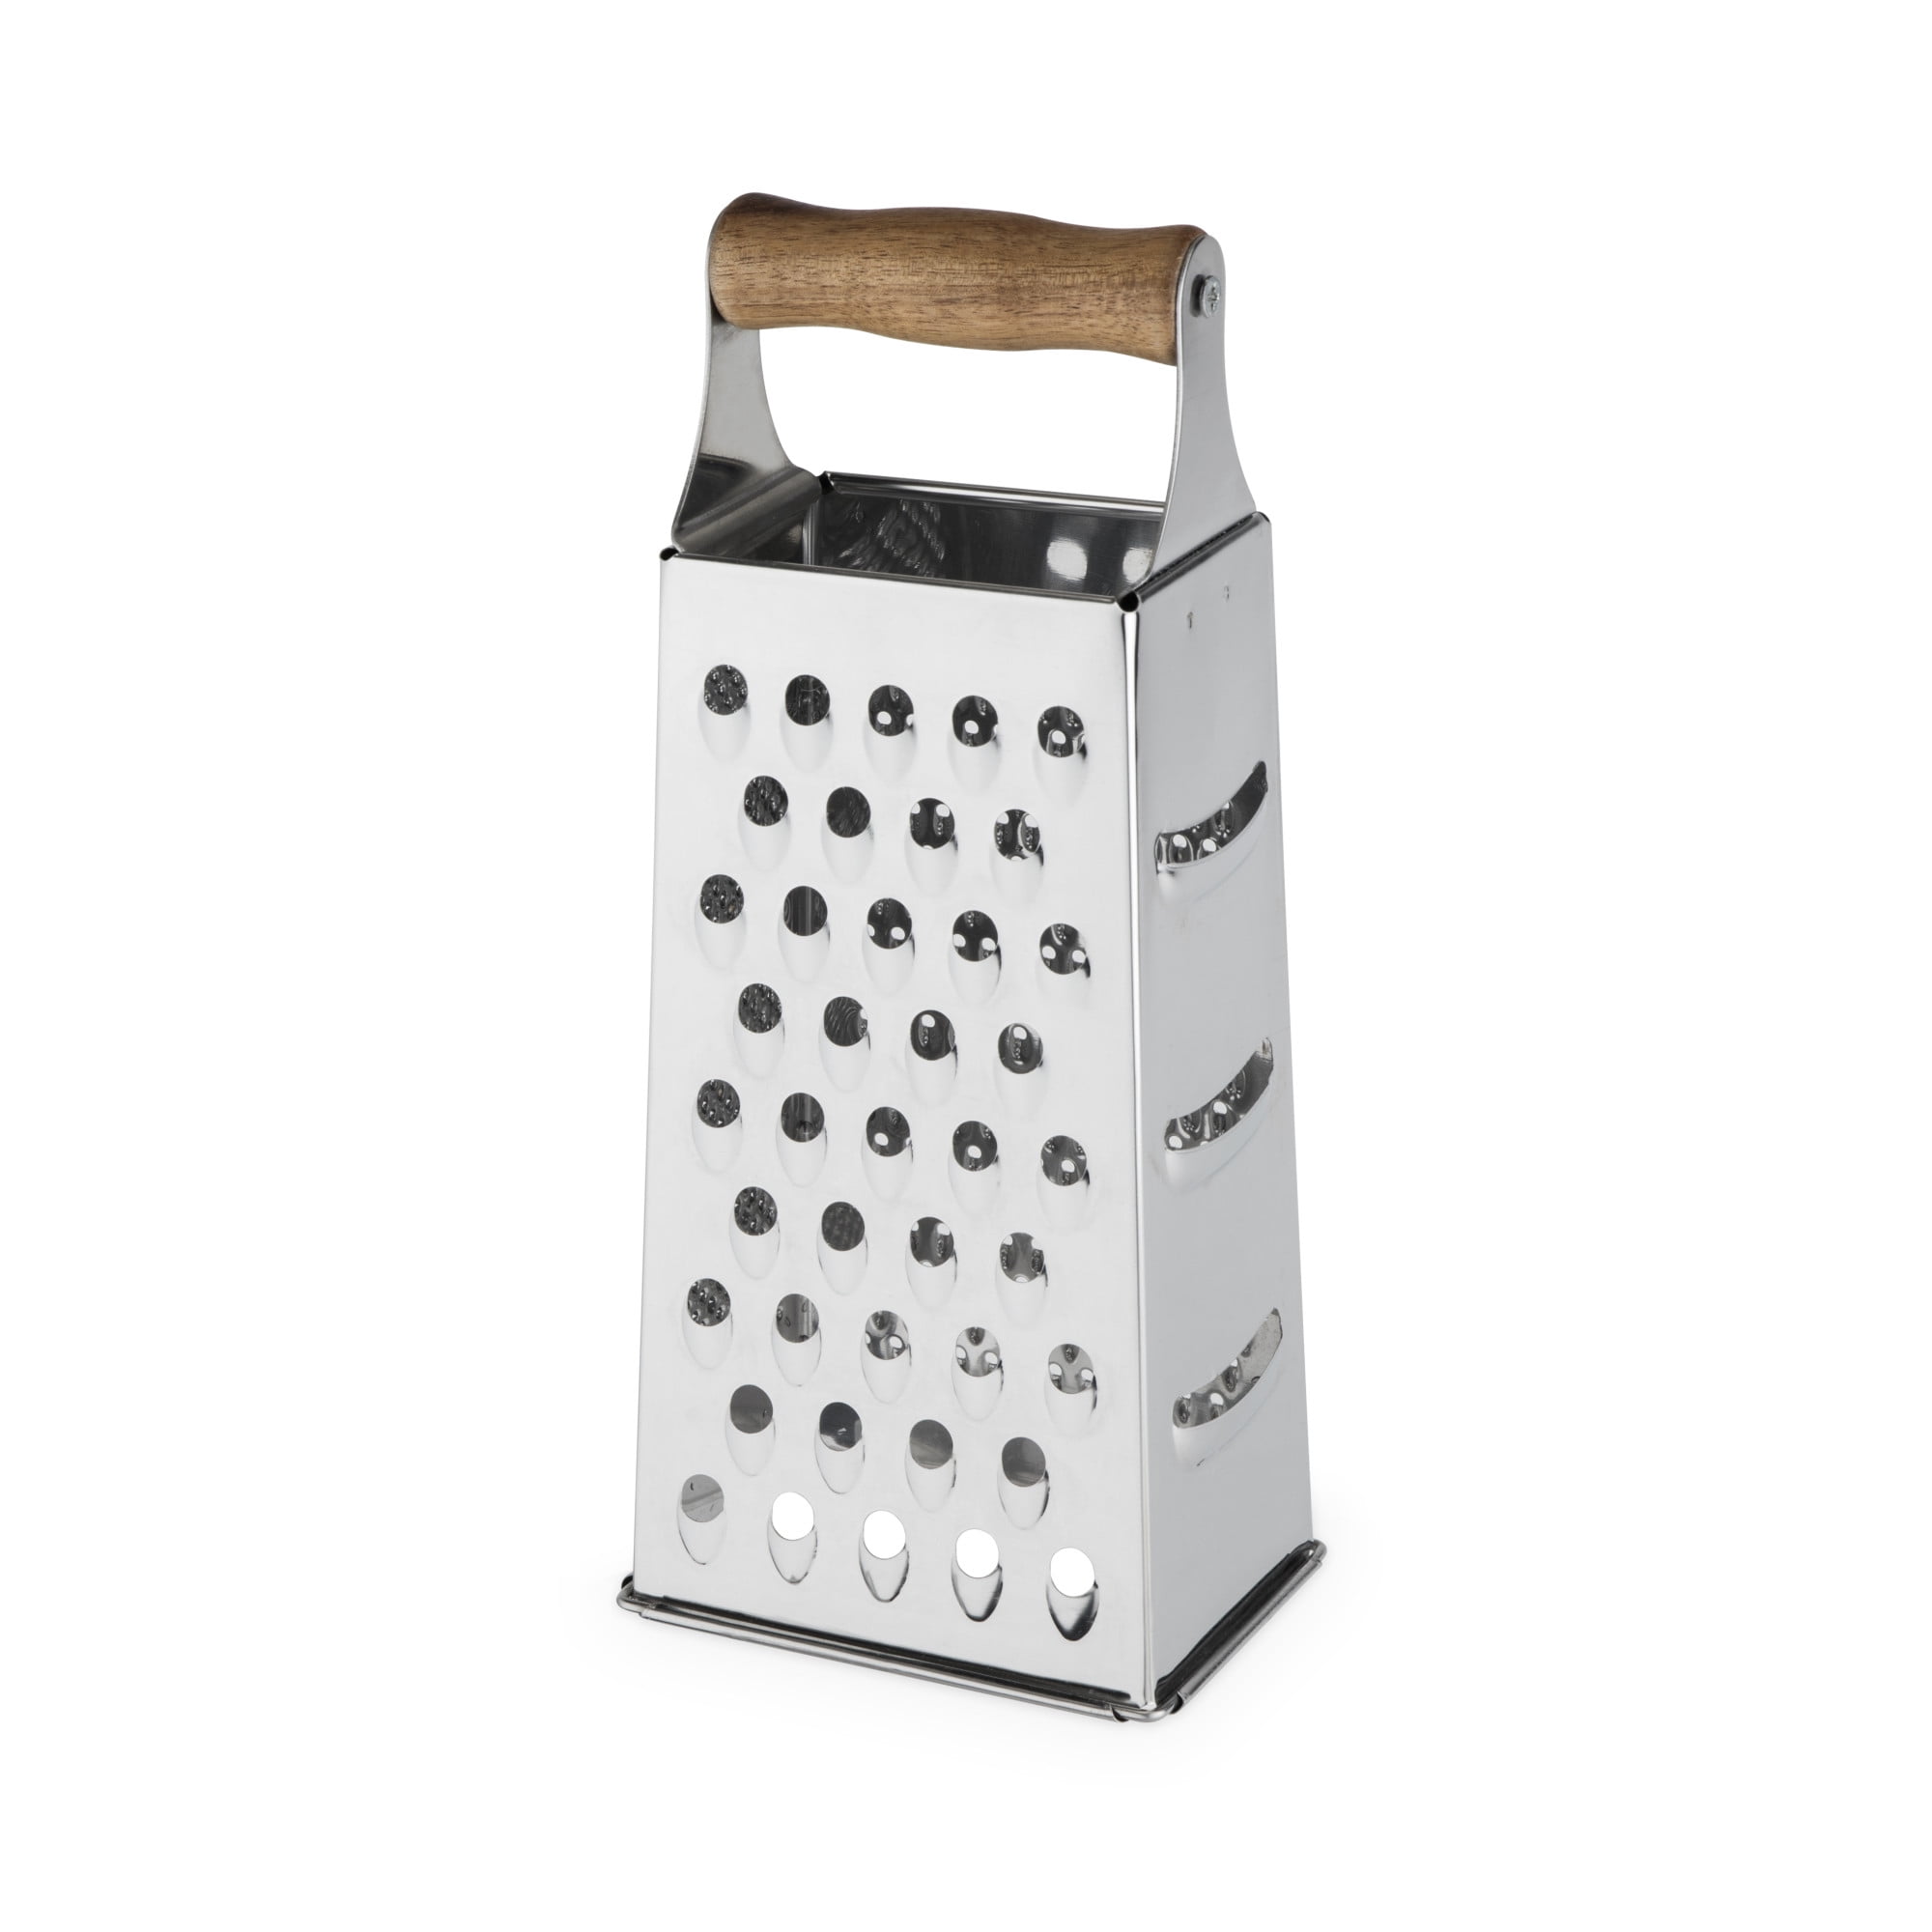 Wooden Cheese Grater Rustic Brown Cheese Shredder With Handle